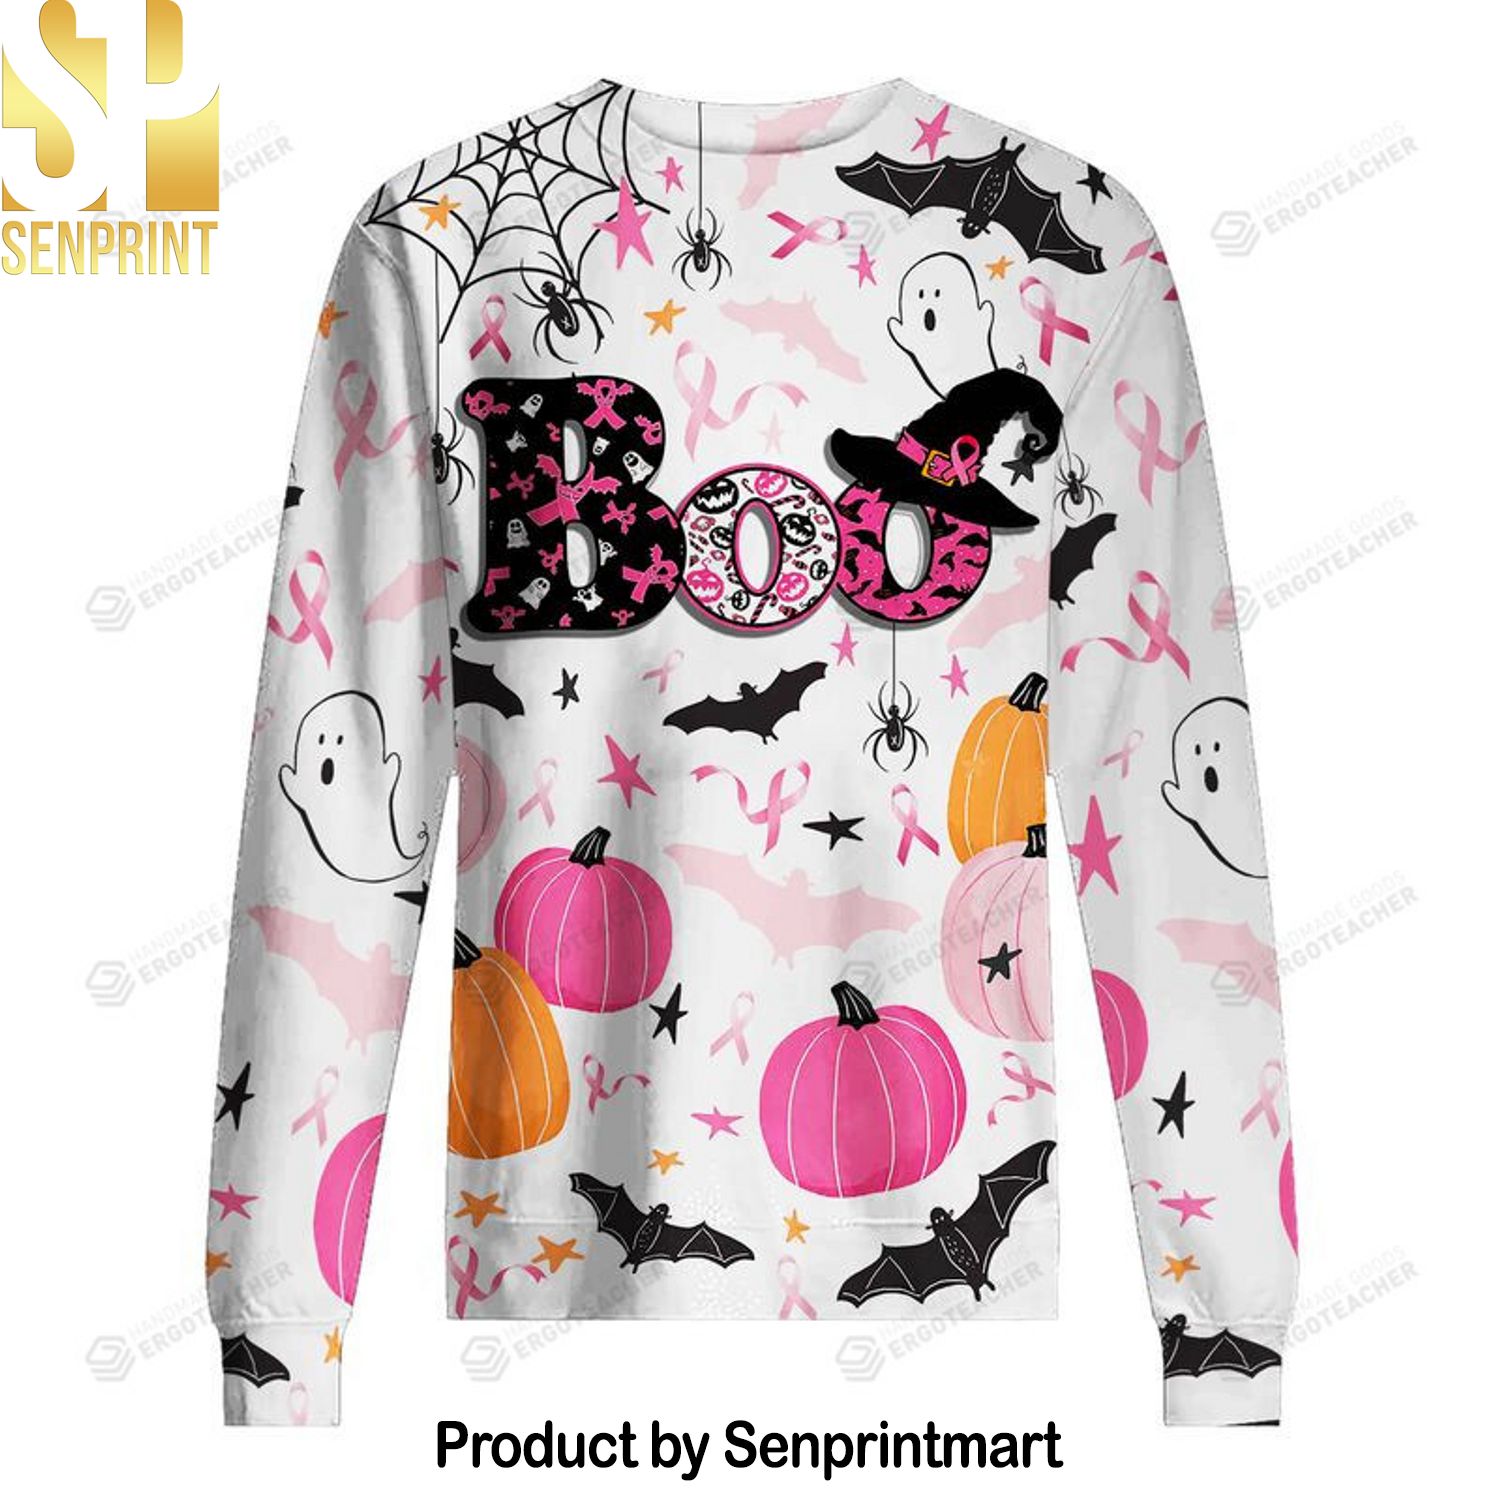 Boo Happy Halloween Breast Cancer Awareness Knitting Pattern Ugly Christmas Holiday Sweater